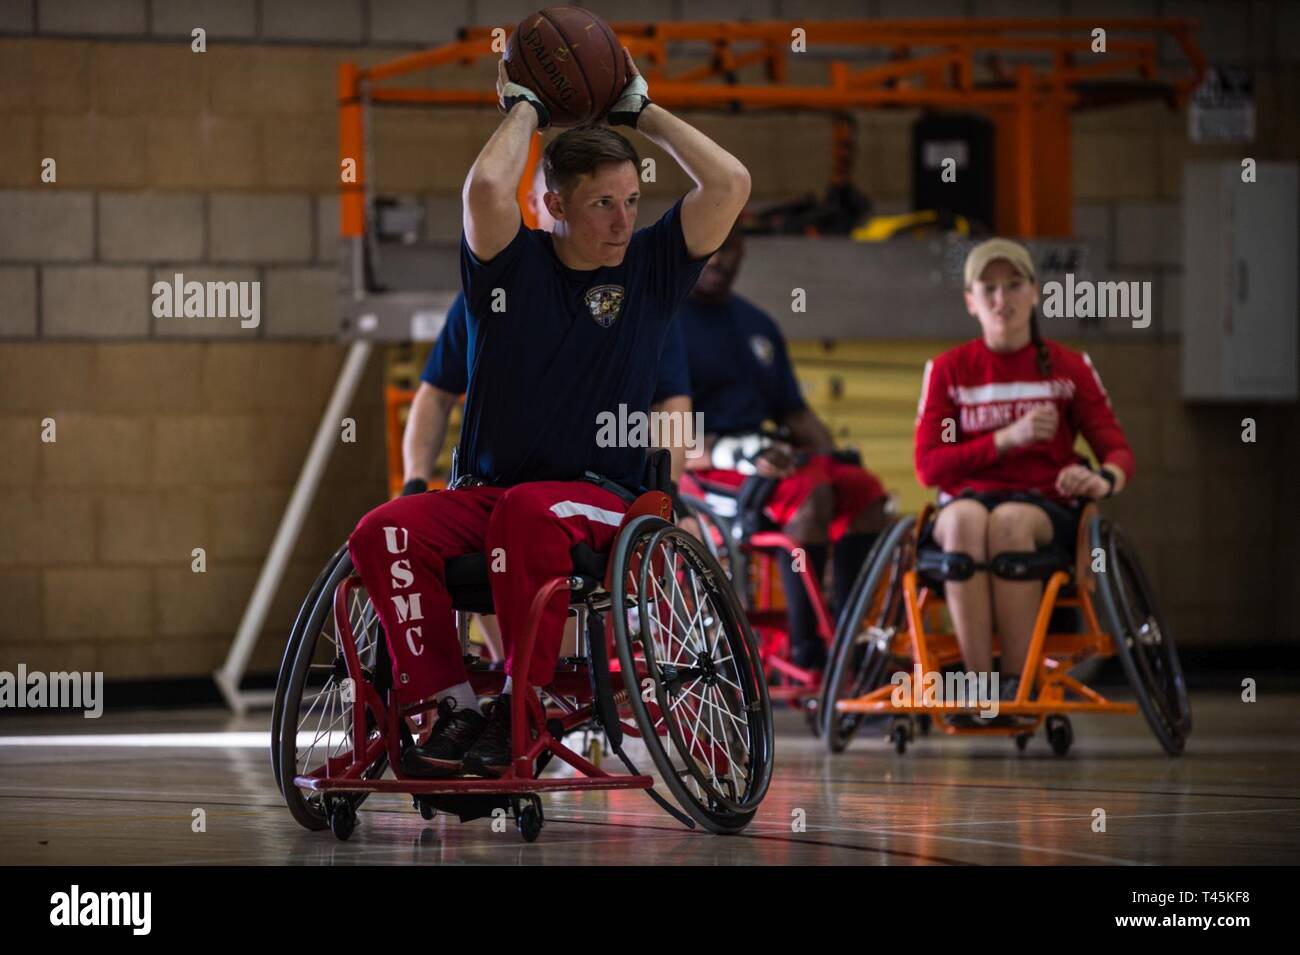 A U.S. Marine Corps athlete prepares to pass during a 2019 Marine Corps Trials wheelchair basketball practice session at Marine Corps Base Camp Pendleton, California, March 1. The Marine Corps Trials promotes recovery and rehabilitation through adaptive sports participation and develops camaraderie among recovering service members and veterans. Additionally, the competition is an opportunity for participants to demonstrate physical and mental achievements and serves as the primary venue to select Marine Corps participants for the DoD Warrior Games. Stock Photo